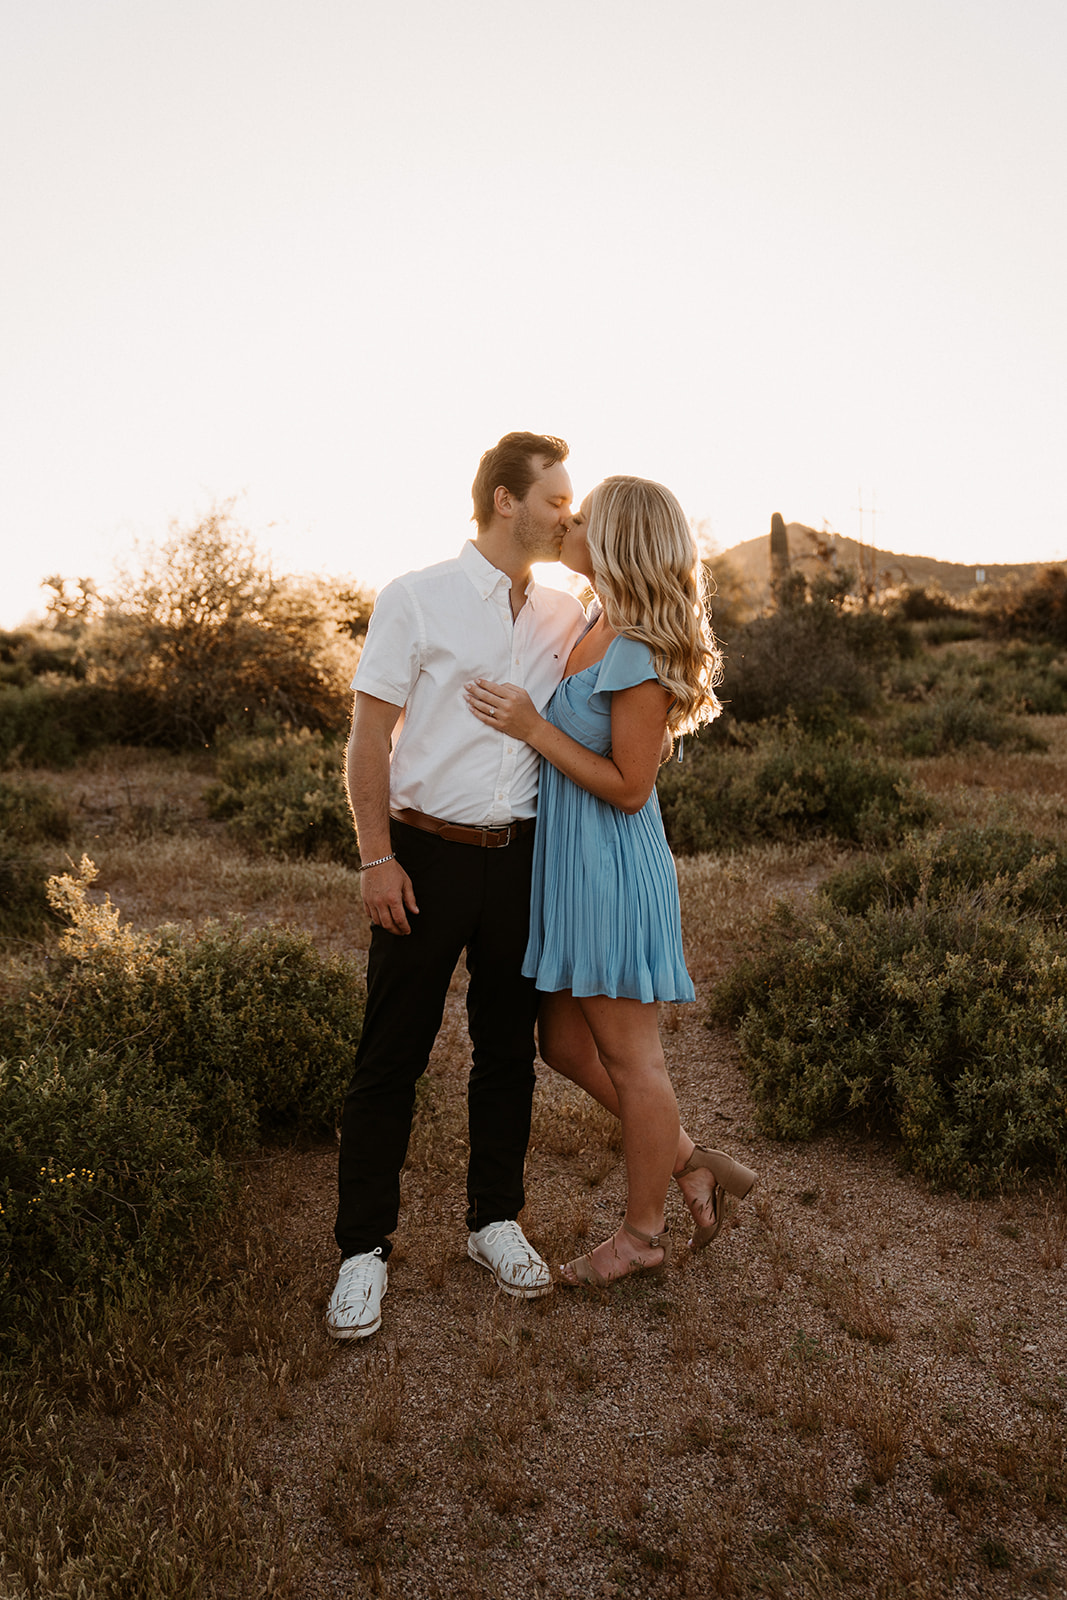 Authentic and Candid Engagement photos in the Phoenix Arizona Desert